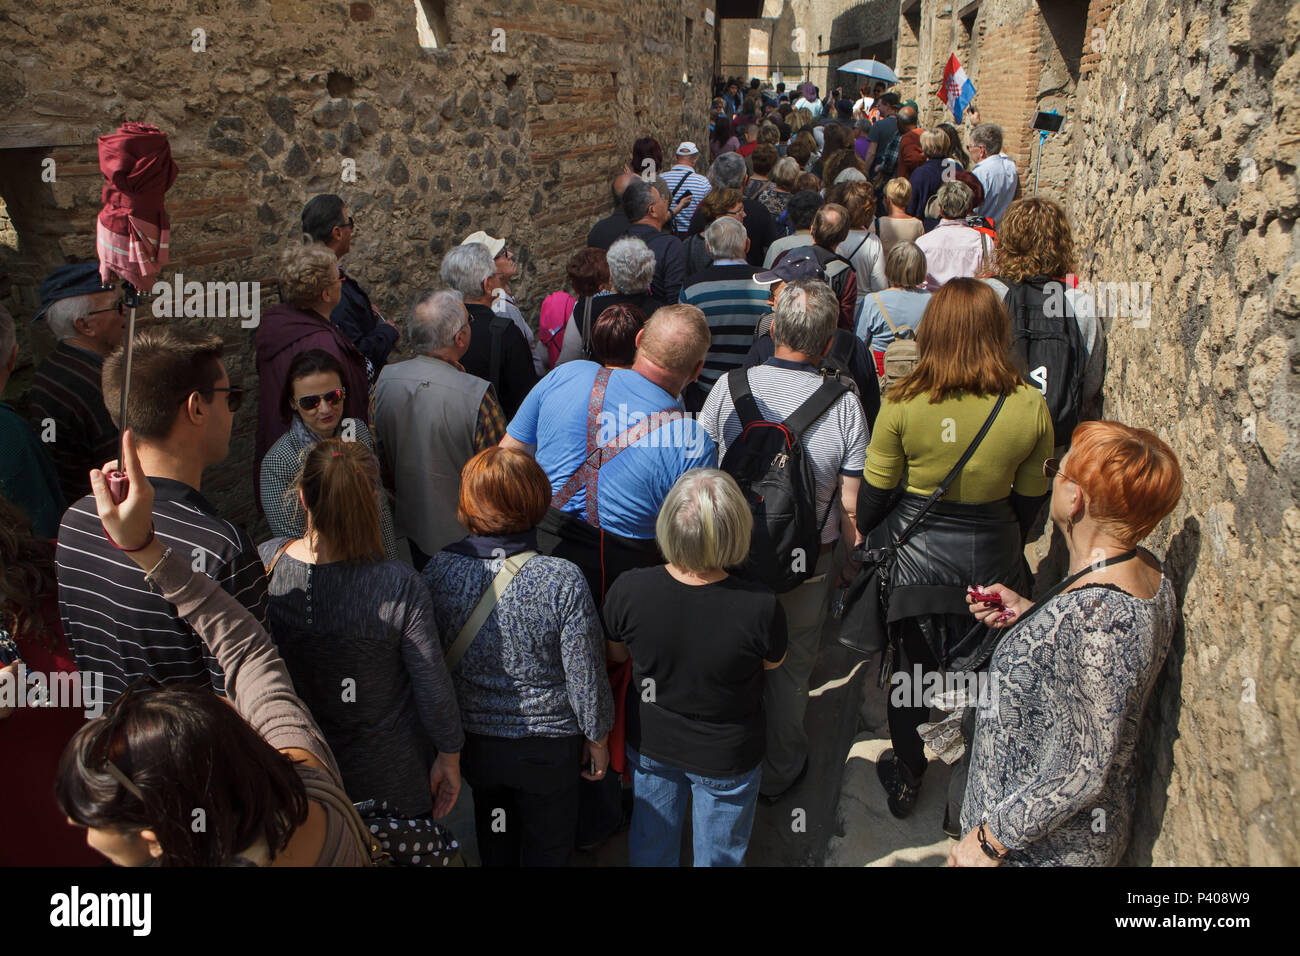 Visitors waiting in a queue to visit a lupanar (Roman brothel) in the archaeological site of Pompeii (Pompei) near Naples, Campania, Italy. Stock Photo